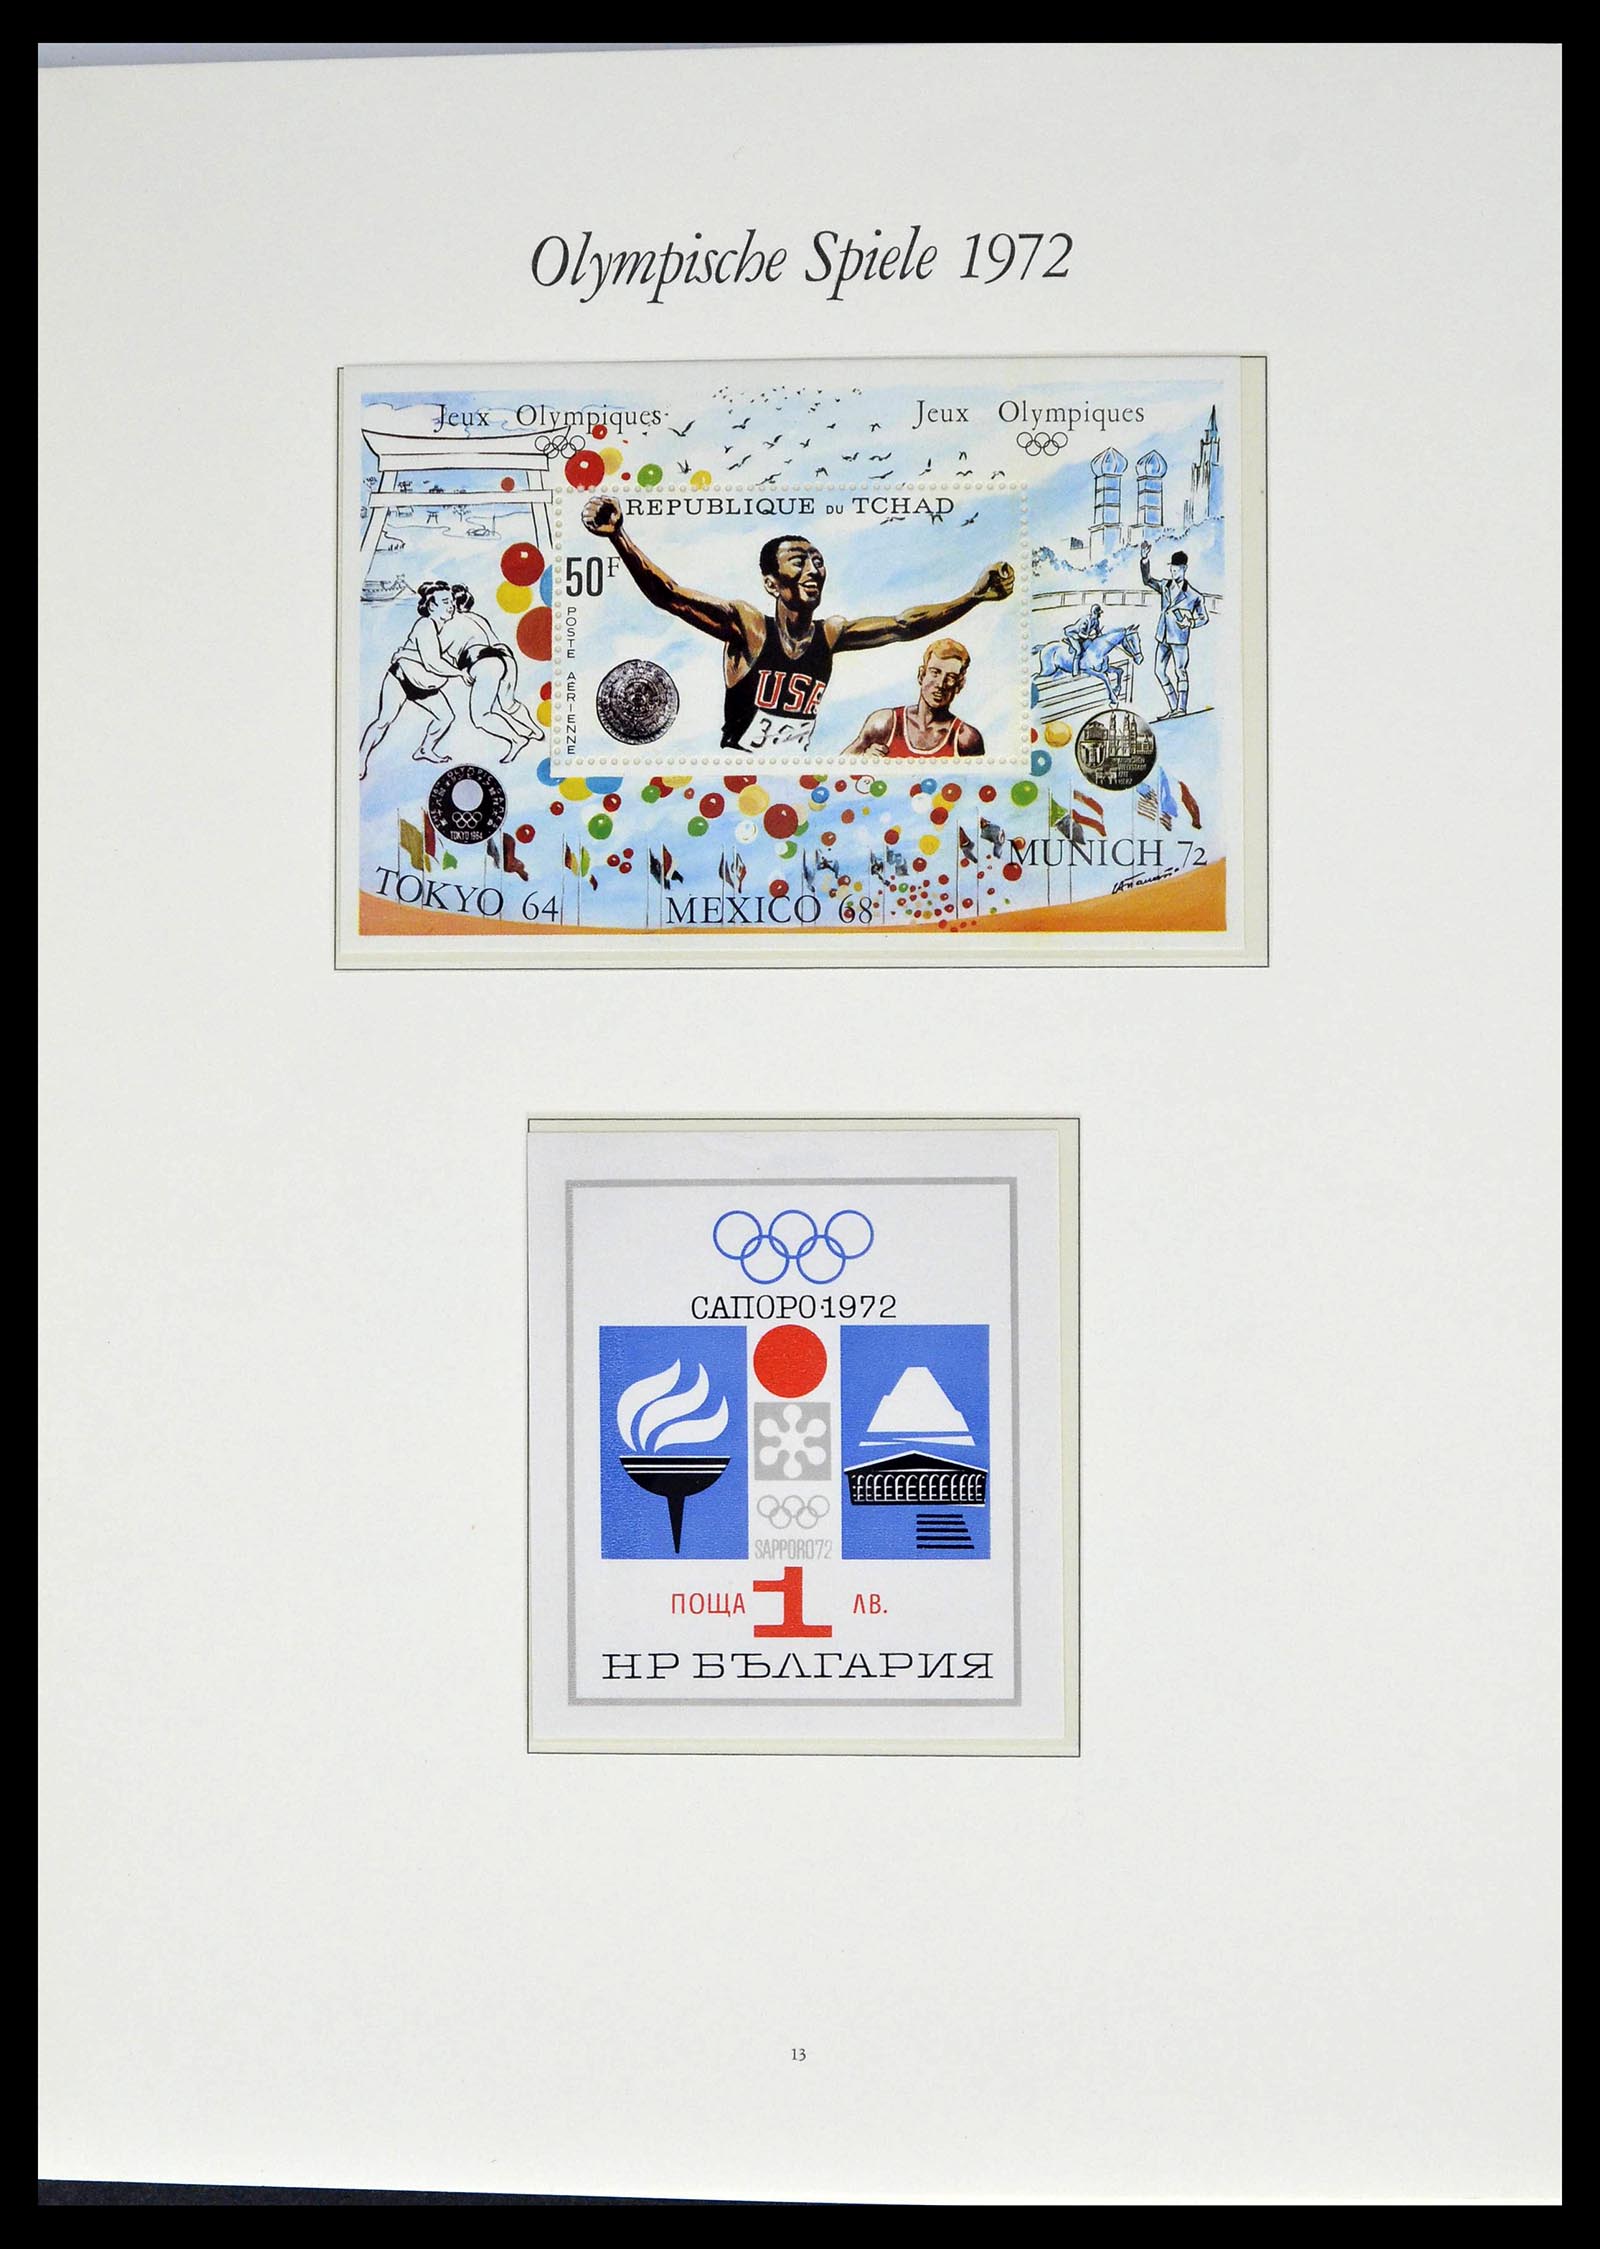 39237 0073 - Stamp collection 39237 Olympics 1972.